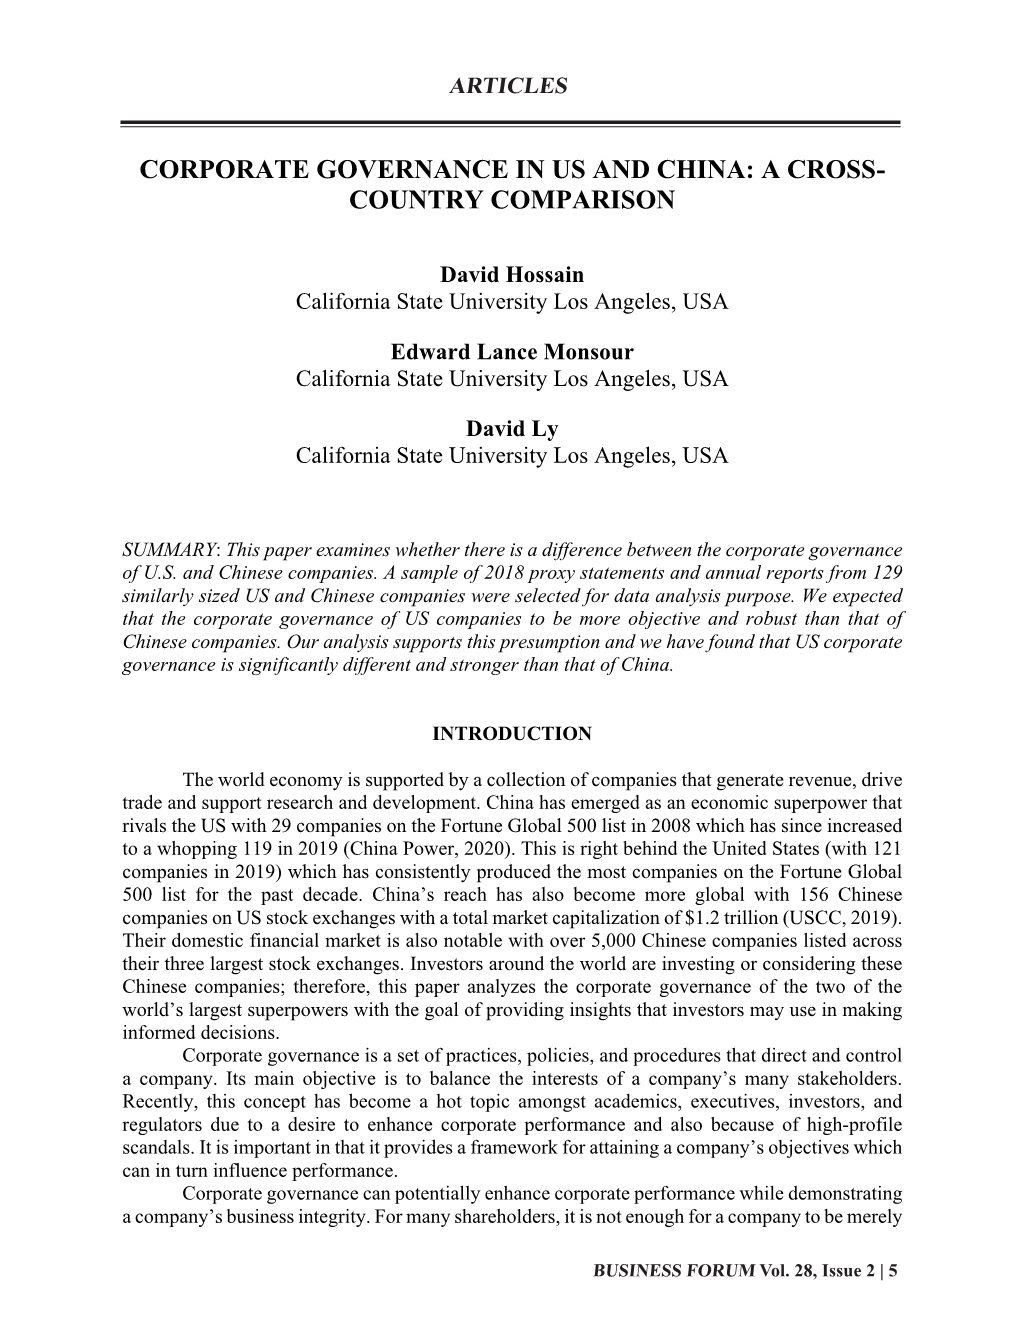 Corporate Governance in Us and China: a Cross- Country Comparison